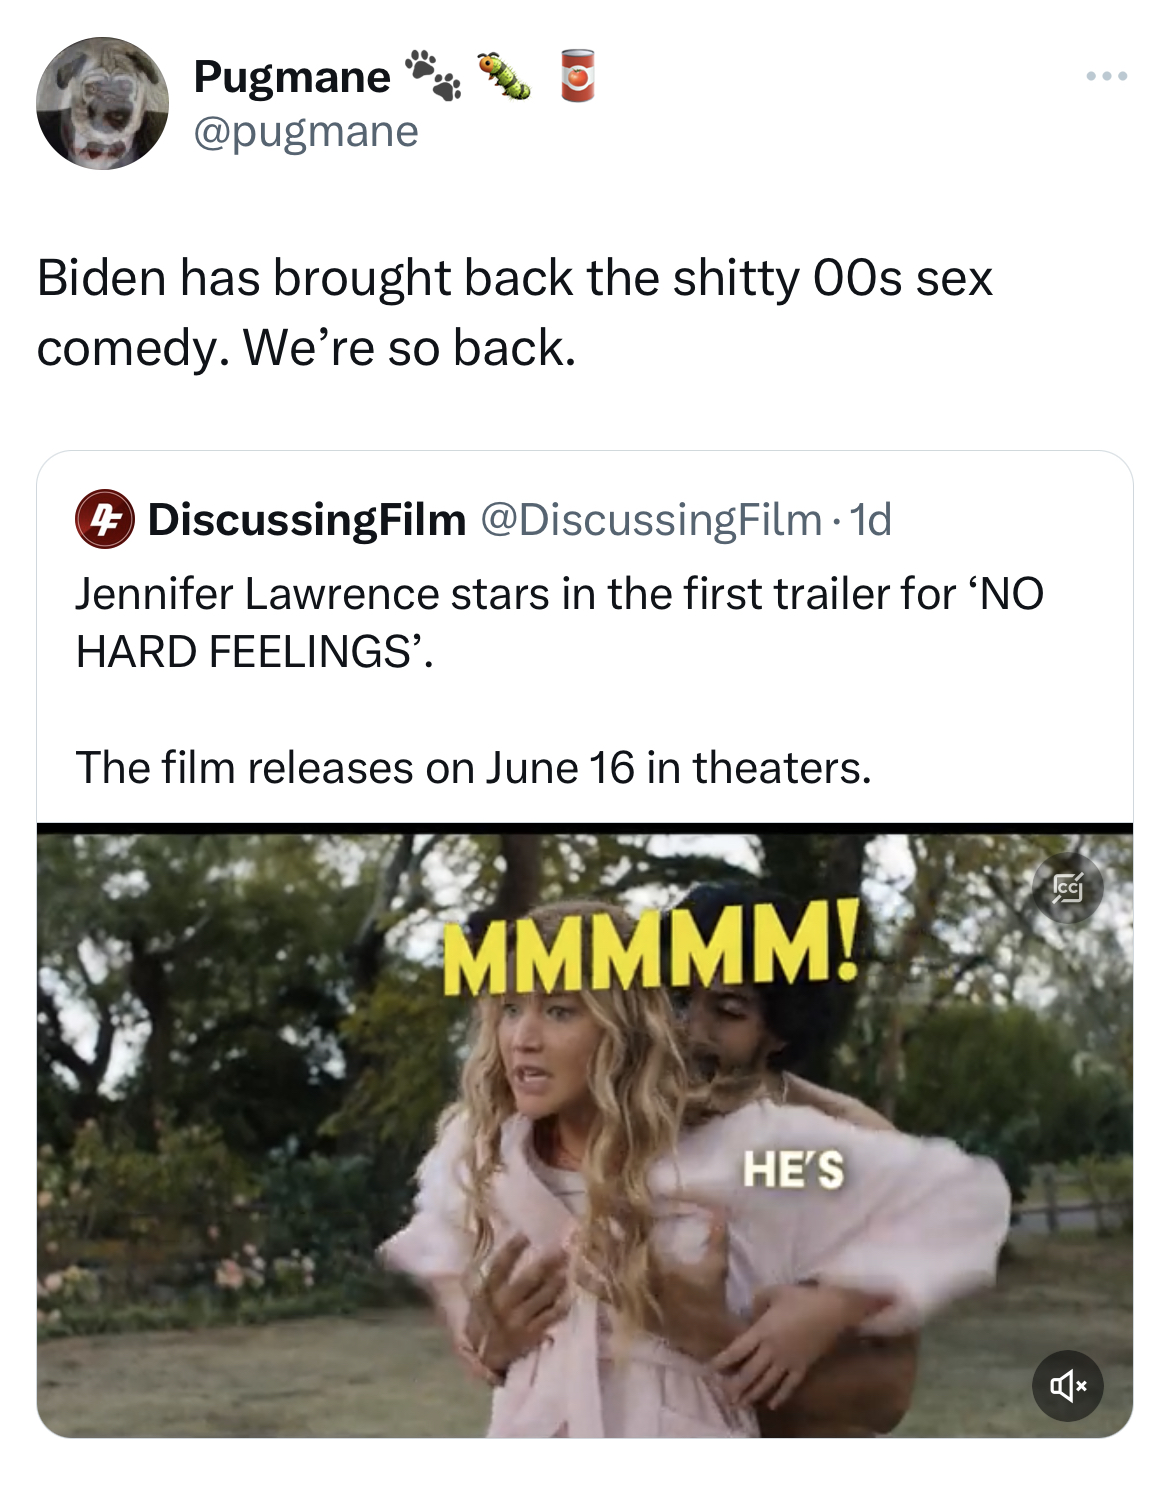 savage tweets roasting celebs - photo caption - Pugmane Biden has brought back the shitty 00s sex comedy. We're so back. DiscussingFilm 1d Jennifer Lawrence stars in the first trailer for 'No Hard Feelings'. The film releases on June 16 in theaters. Mmmmm